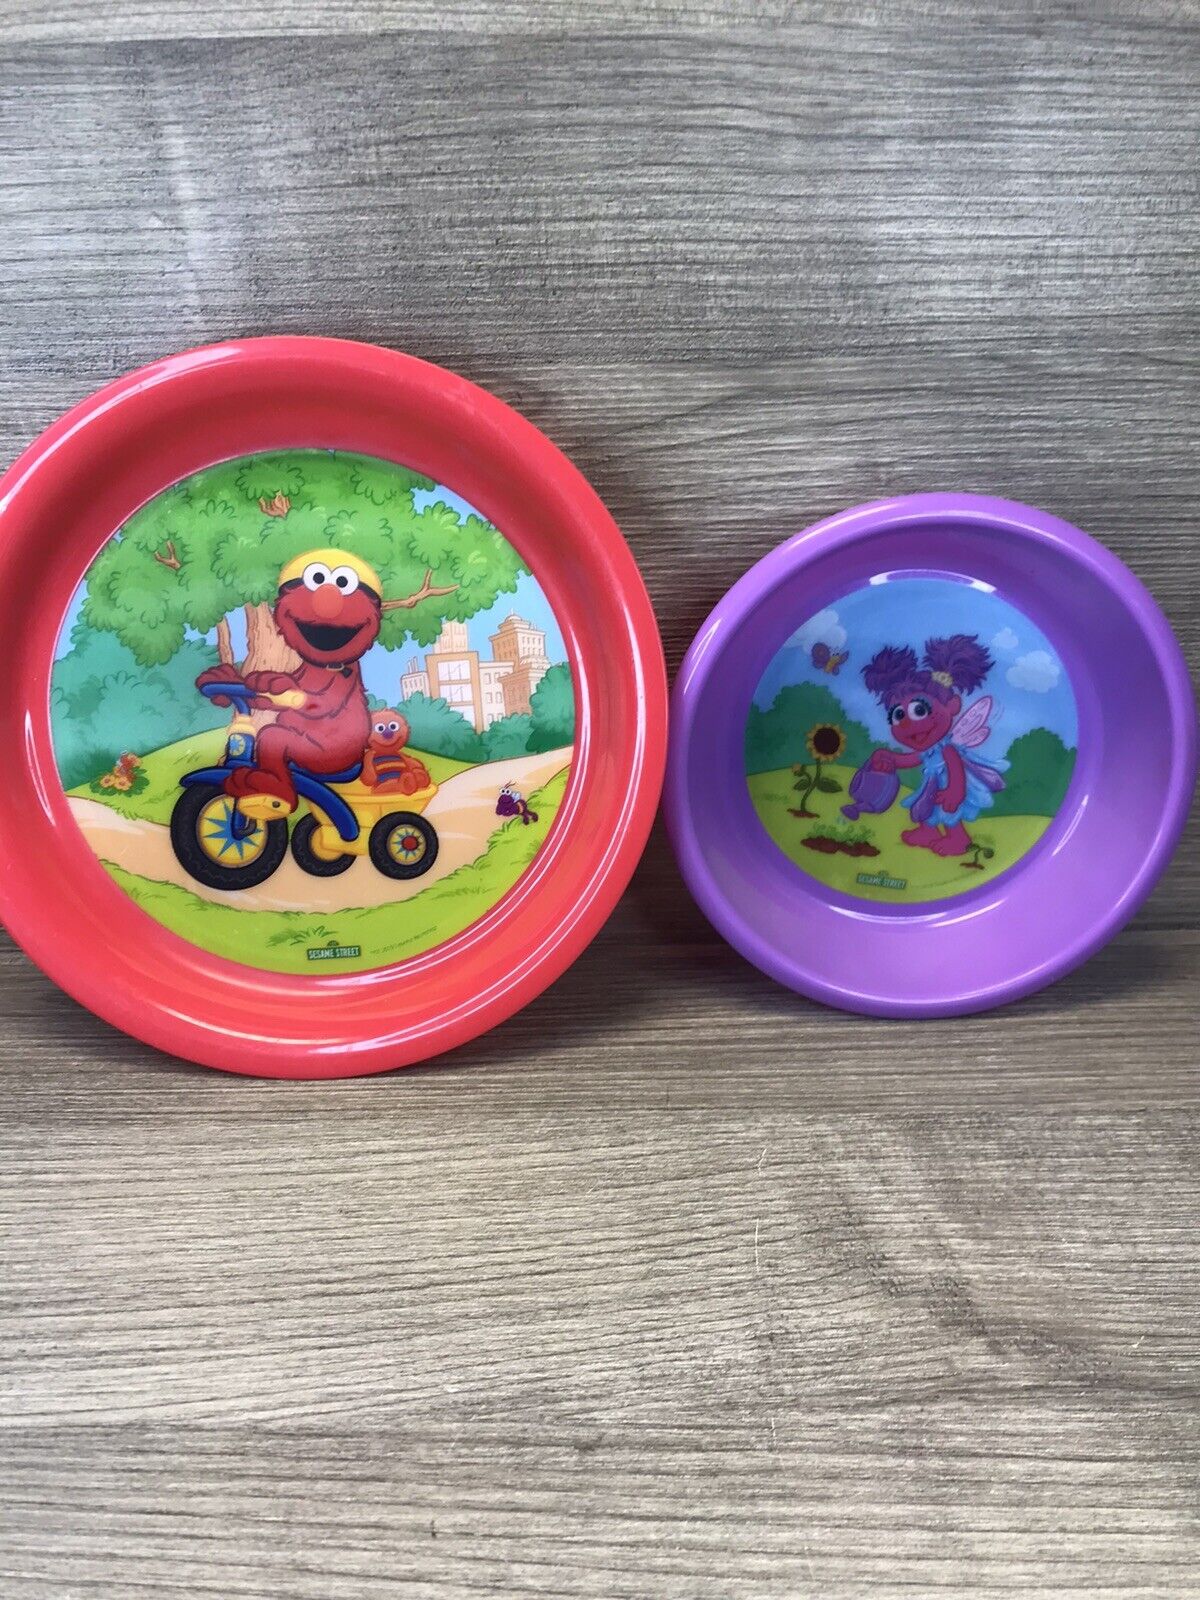 2010 Elmo & Abby Plastic Plate & Bowl Seasame Street Collectibles (bin-1)